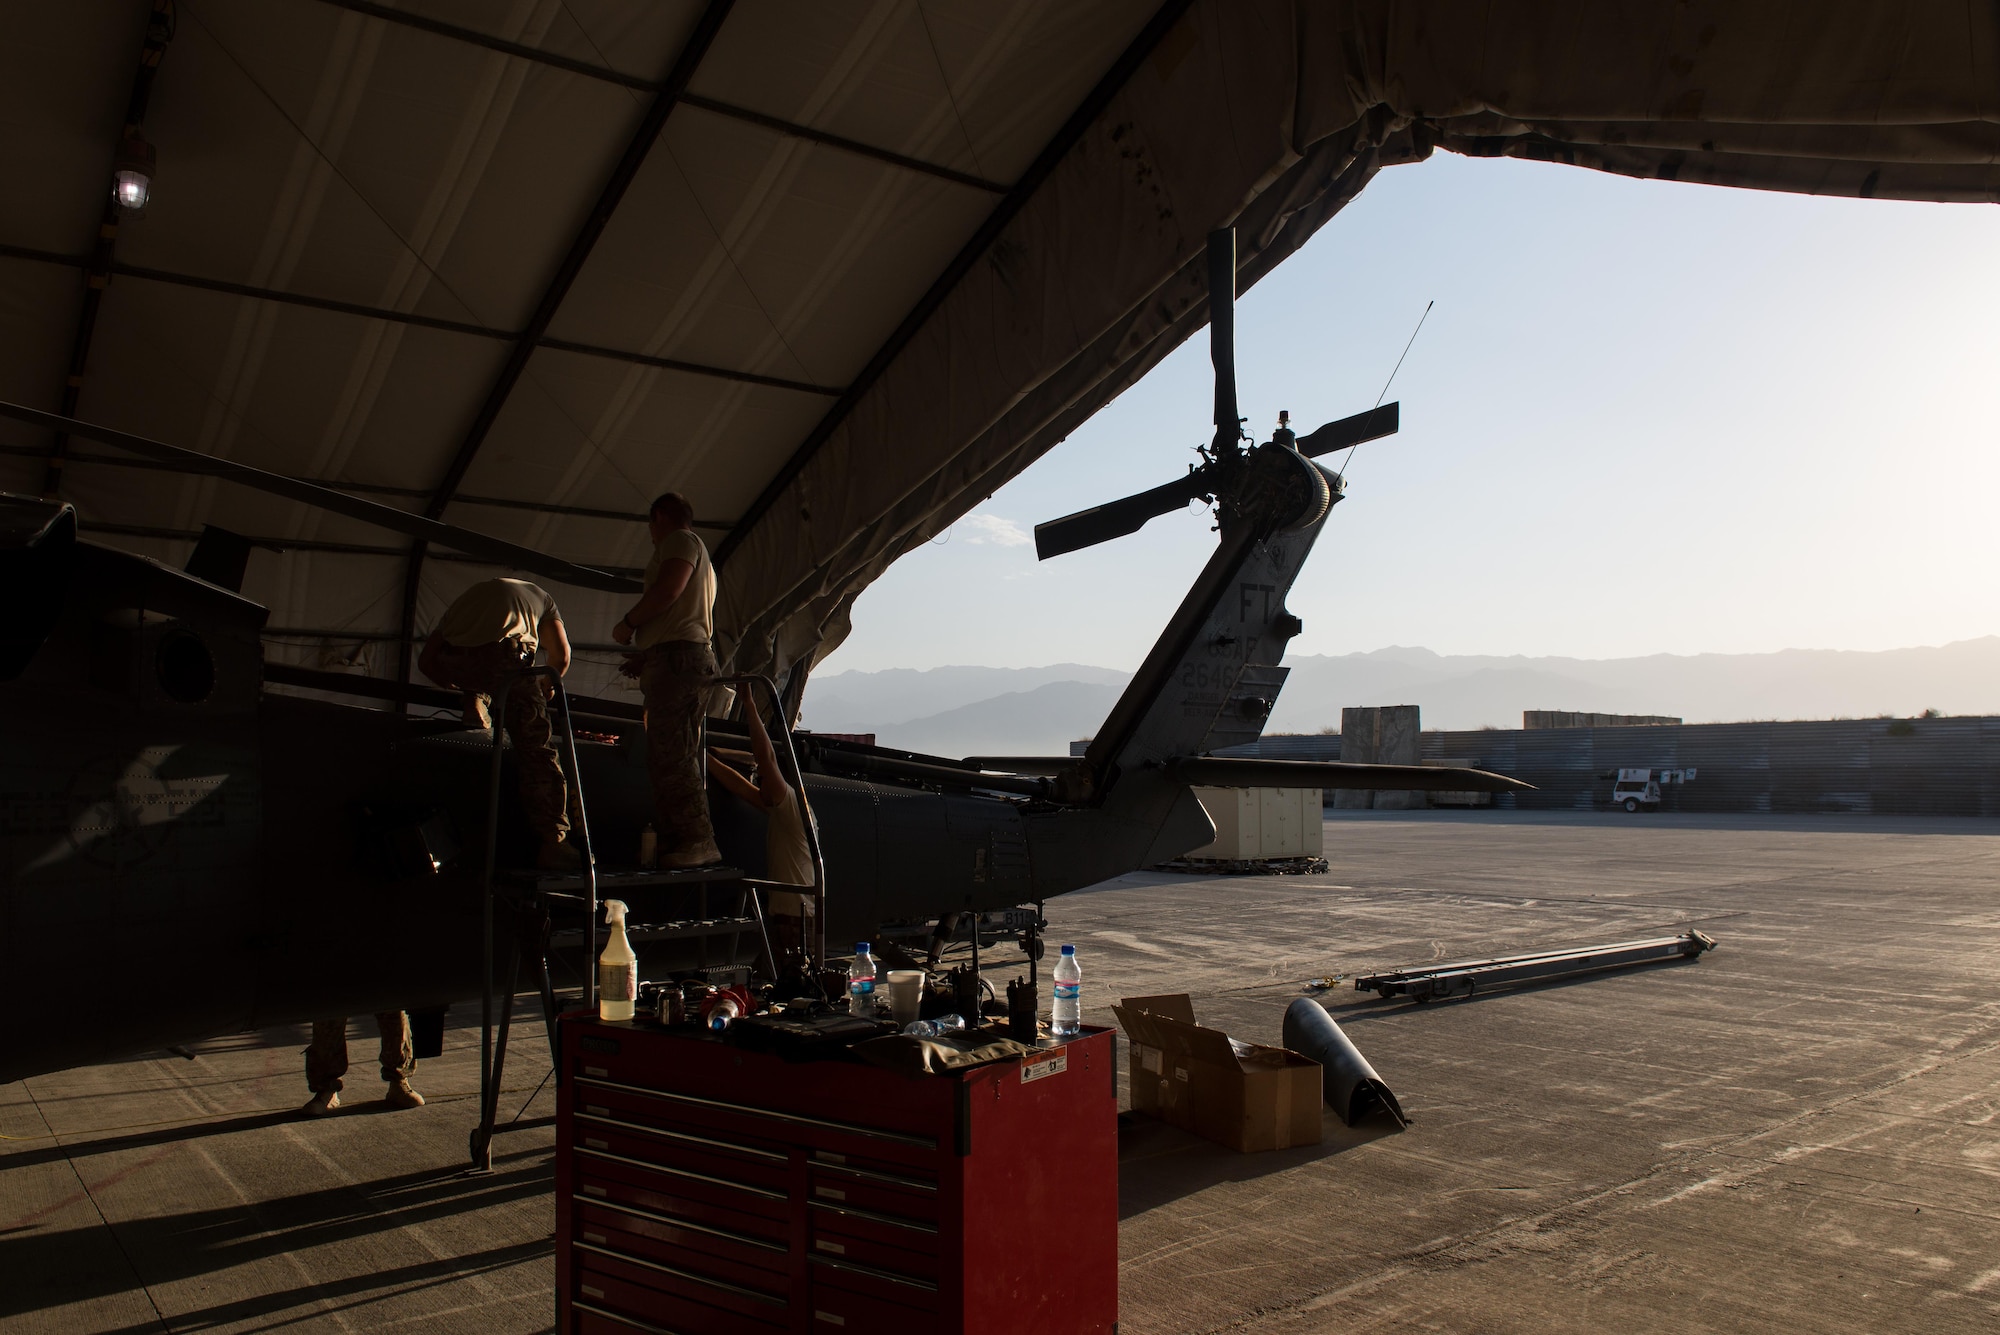 Airmen assigned to the 41st Expeditionary Helicopter Maintenance Unit work to complete a 50-hour inspection on a HH-60 Pave Hawk helicopter at Bagram Airfield, Afghanistan, June 28, 2015. The 41st EHMU ensures Pave Hawks on Bagram Airfield are prepared for flight and returned to a mission-ready state once they land. (U.S. Air Force photo/Tech. Sgt. Joseph Swafford)